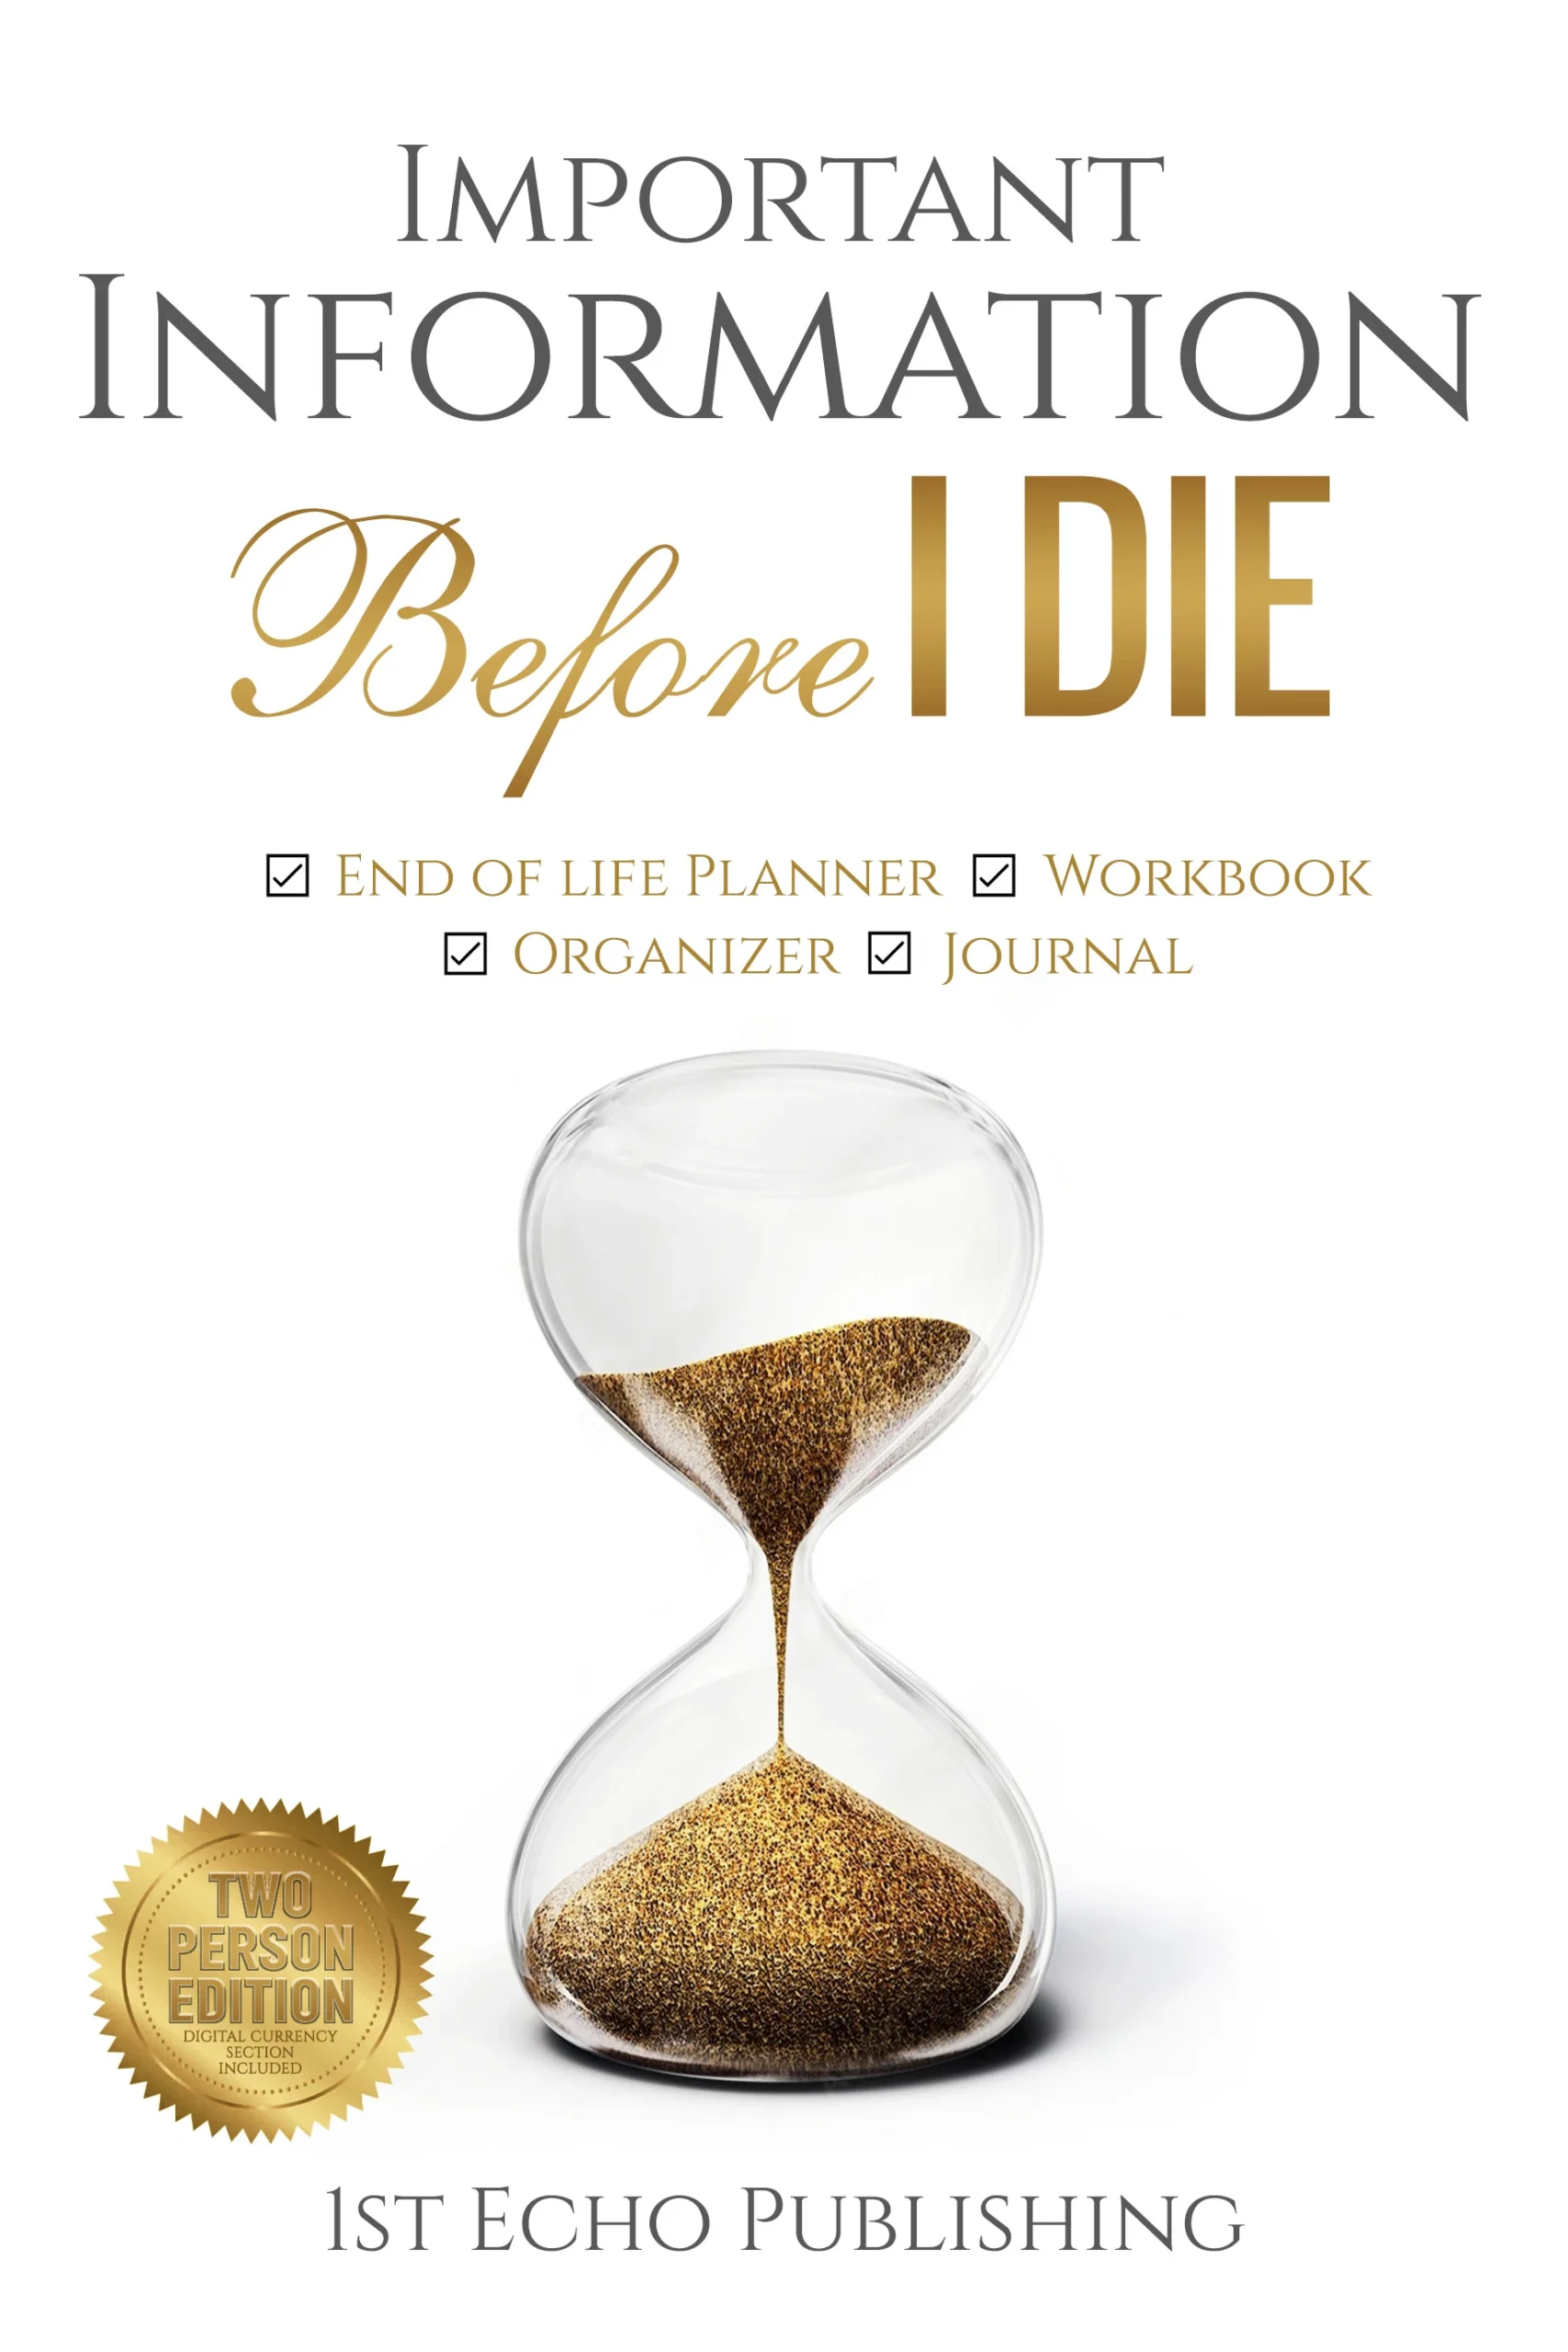 Important Information BEFORE I DIE : End of life Planner, Workbook, Organizer and Journal